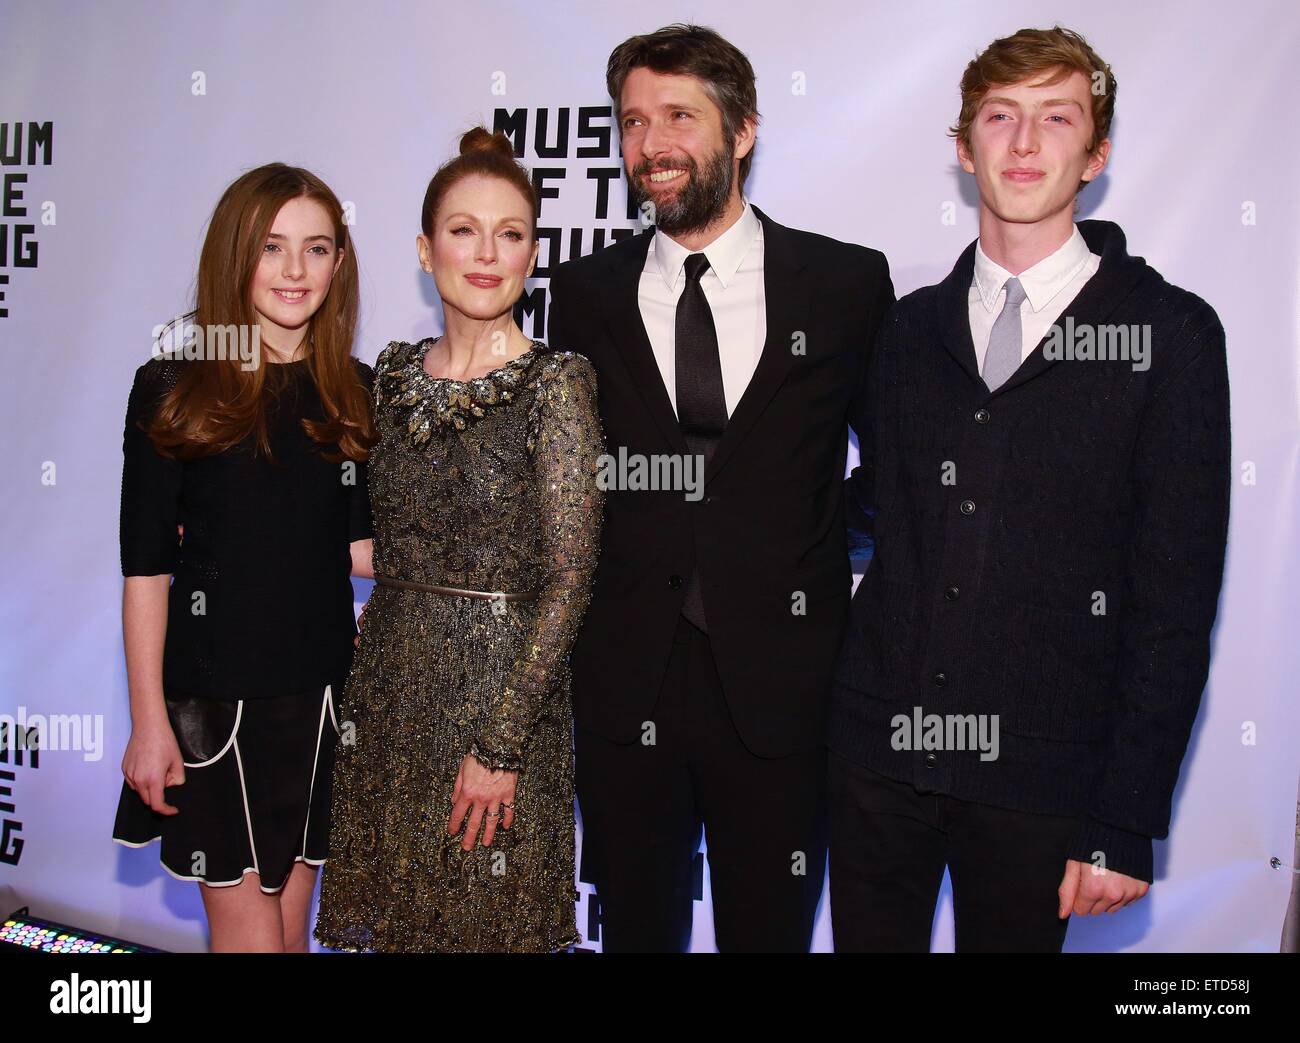 Museum of Moving Image Salutes Julianne Moore at 583 Park Avenue -  Arrivals  Featuring: Liv Freundlich, Julianne Moore, Bart Freundlich, Caleb Freundlich Where: New York, United States When: 21 Jan 2015 Credit: Joseph Marzullo/WENN.com Stock Photo